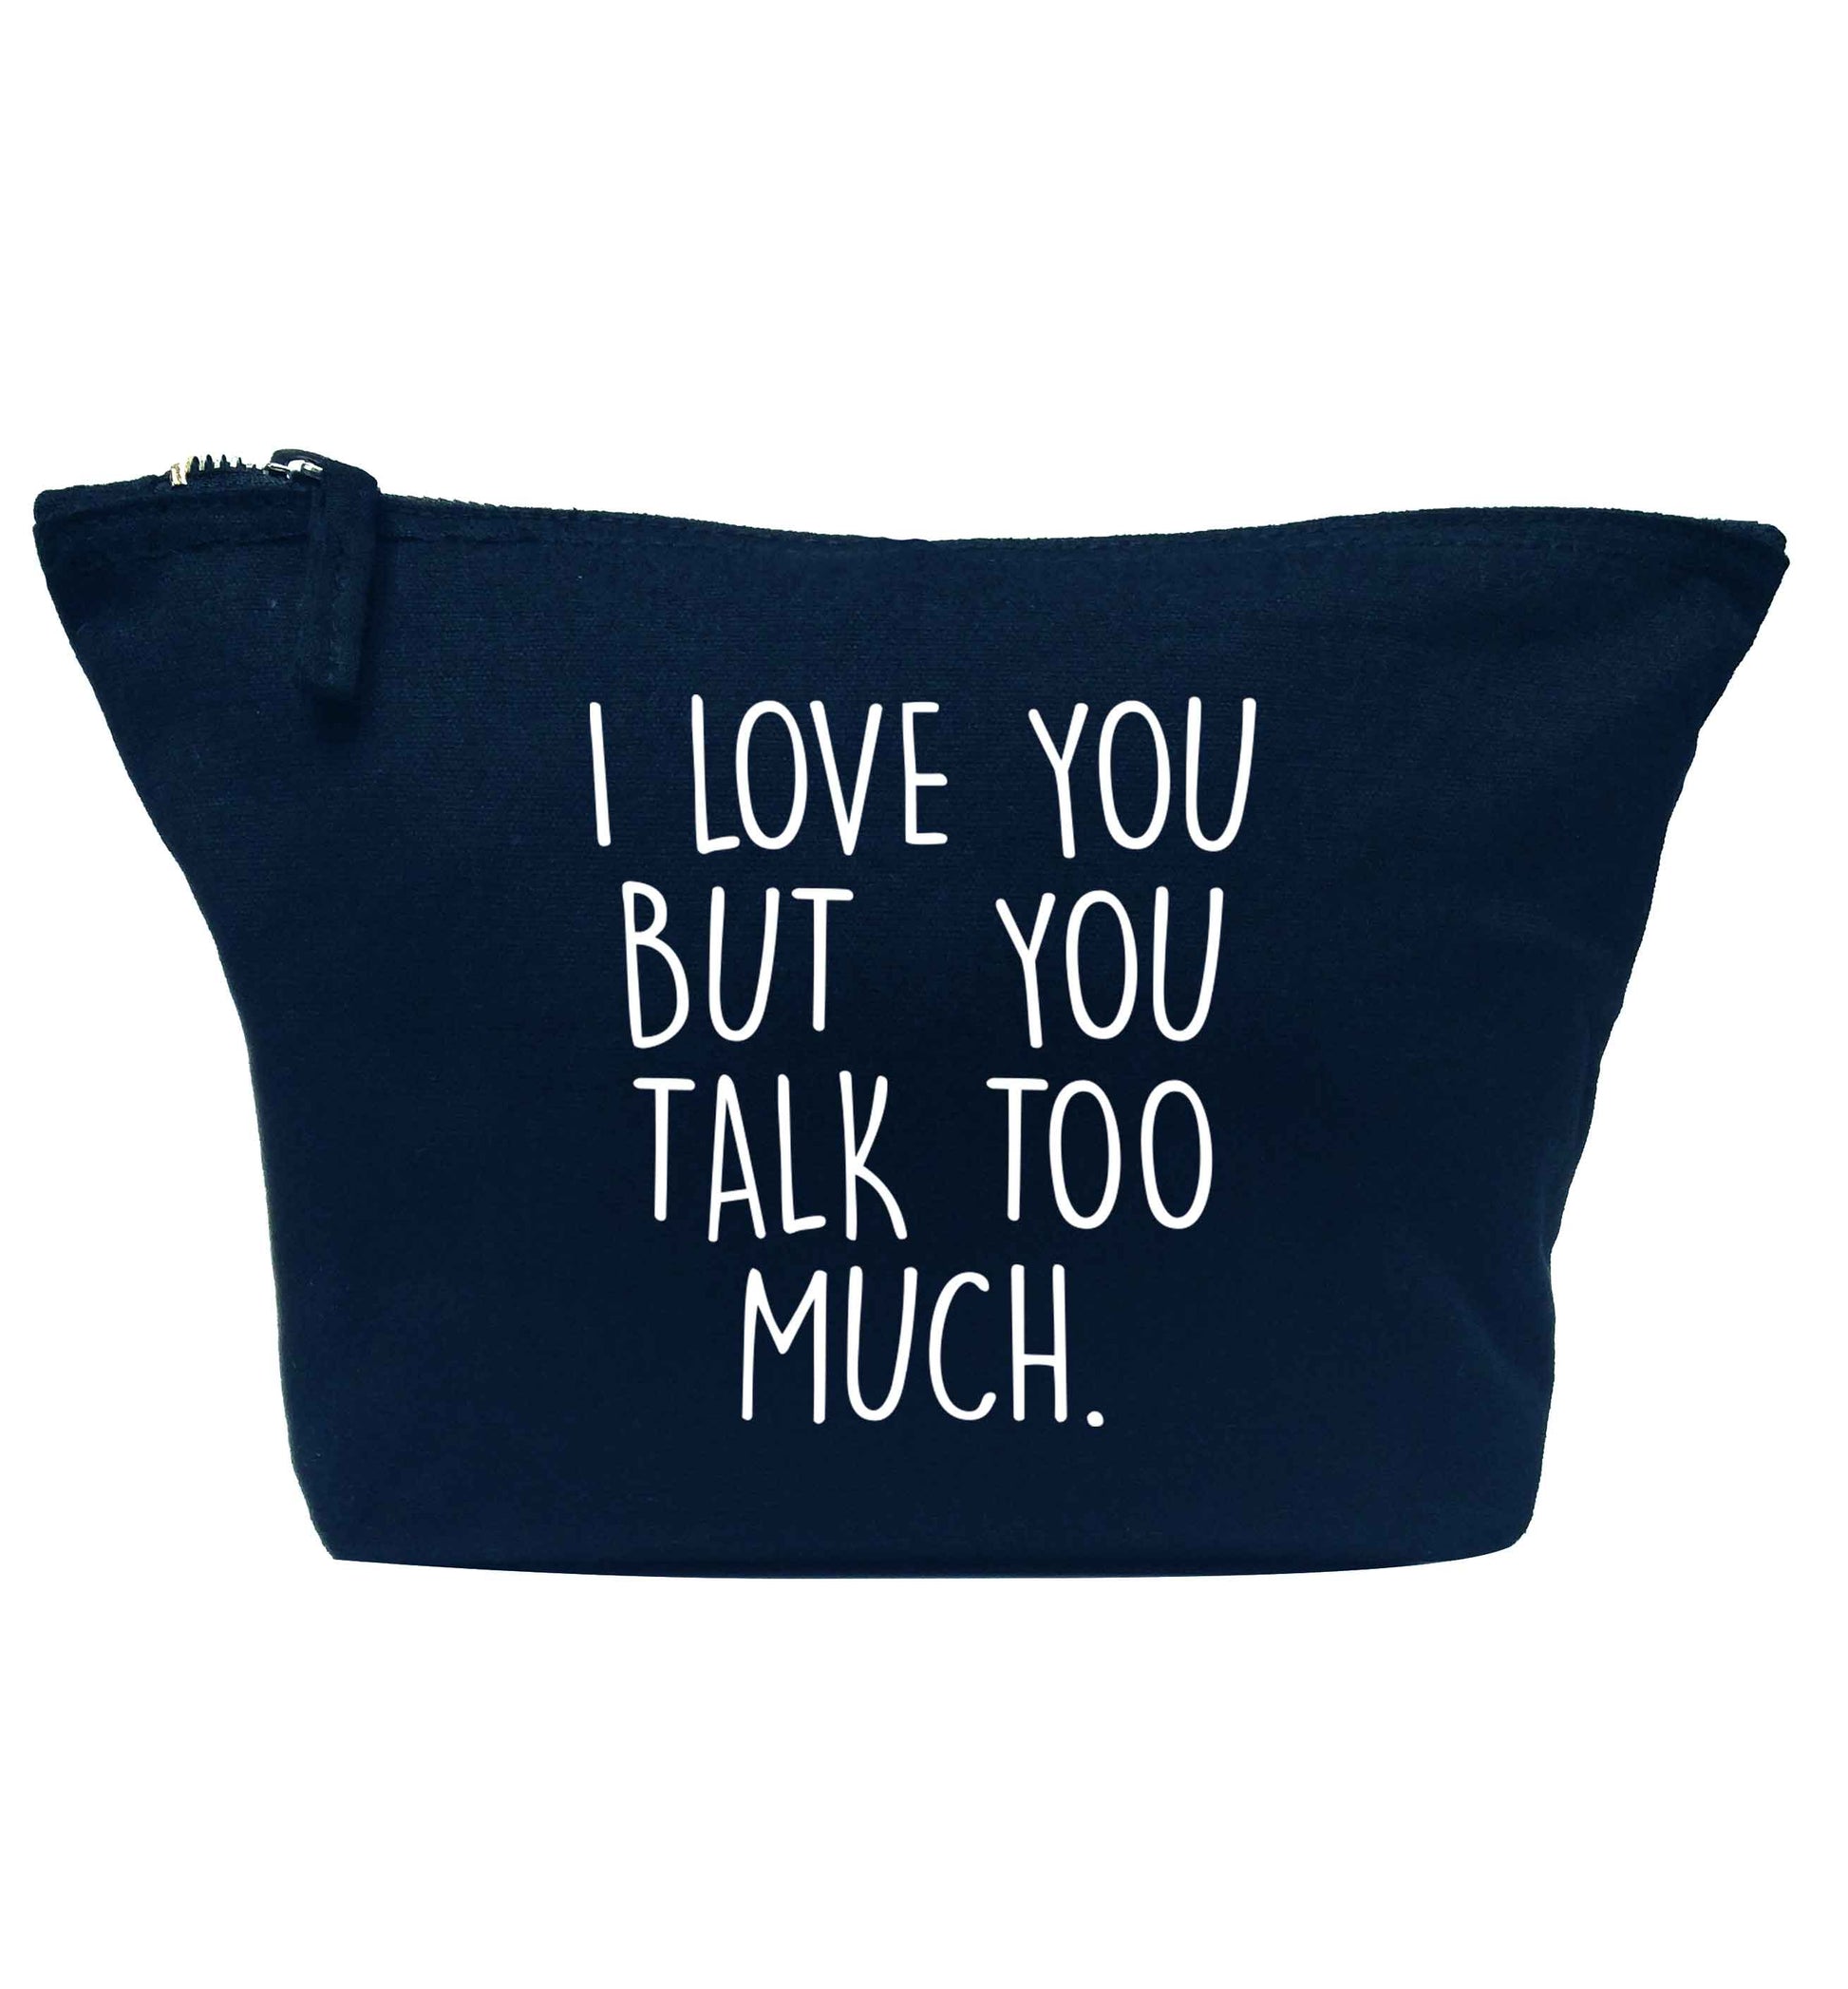 I love you but you talk too much navy makeup bag